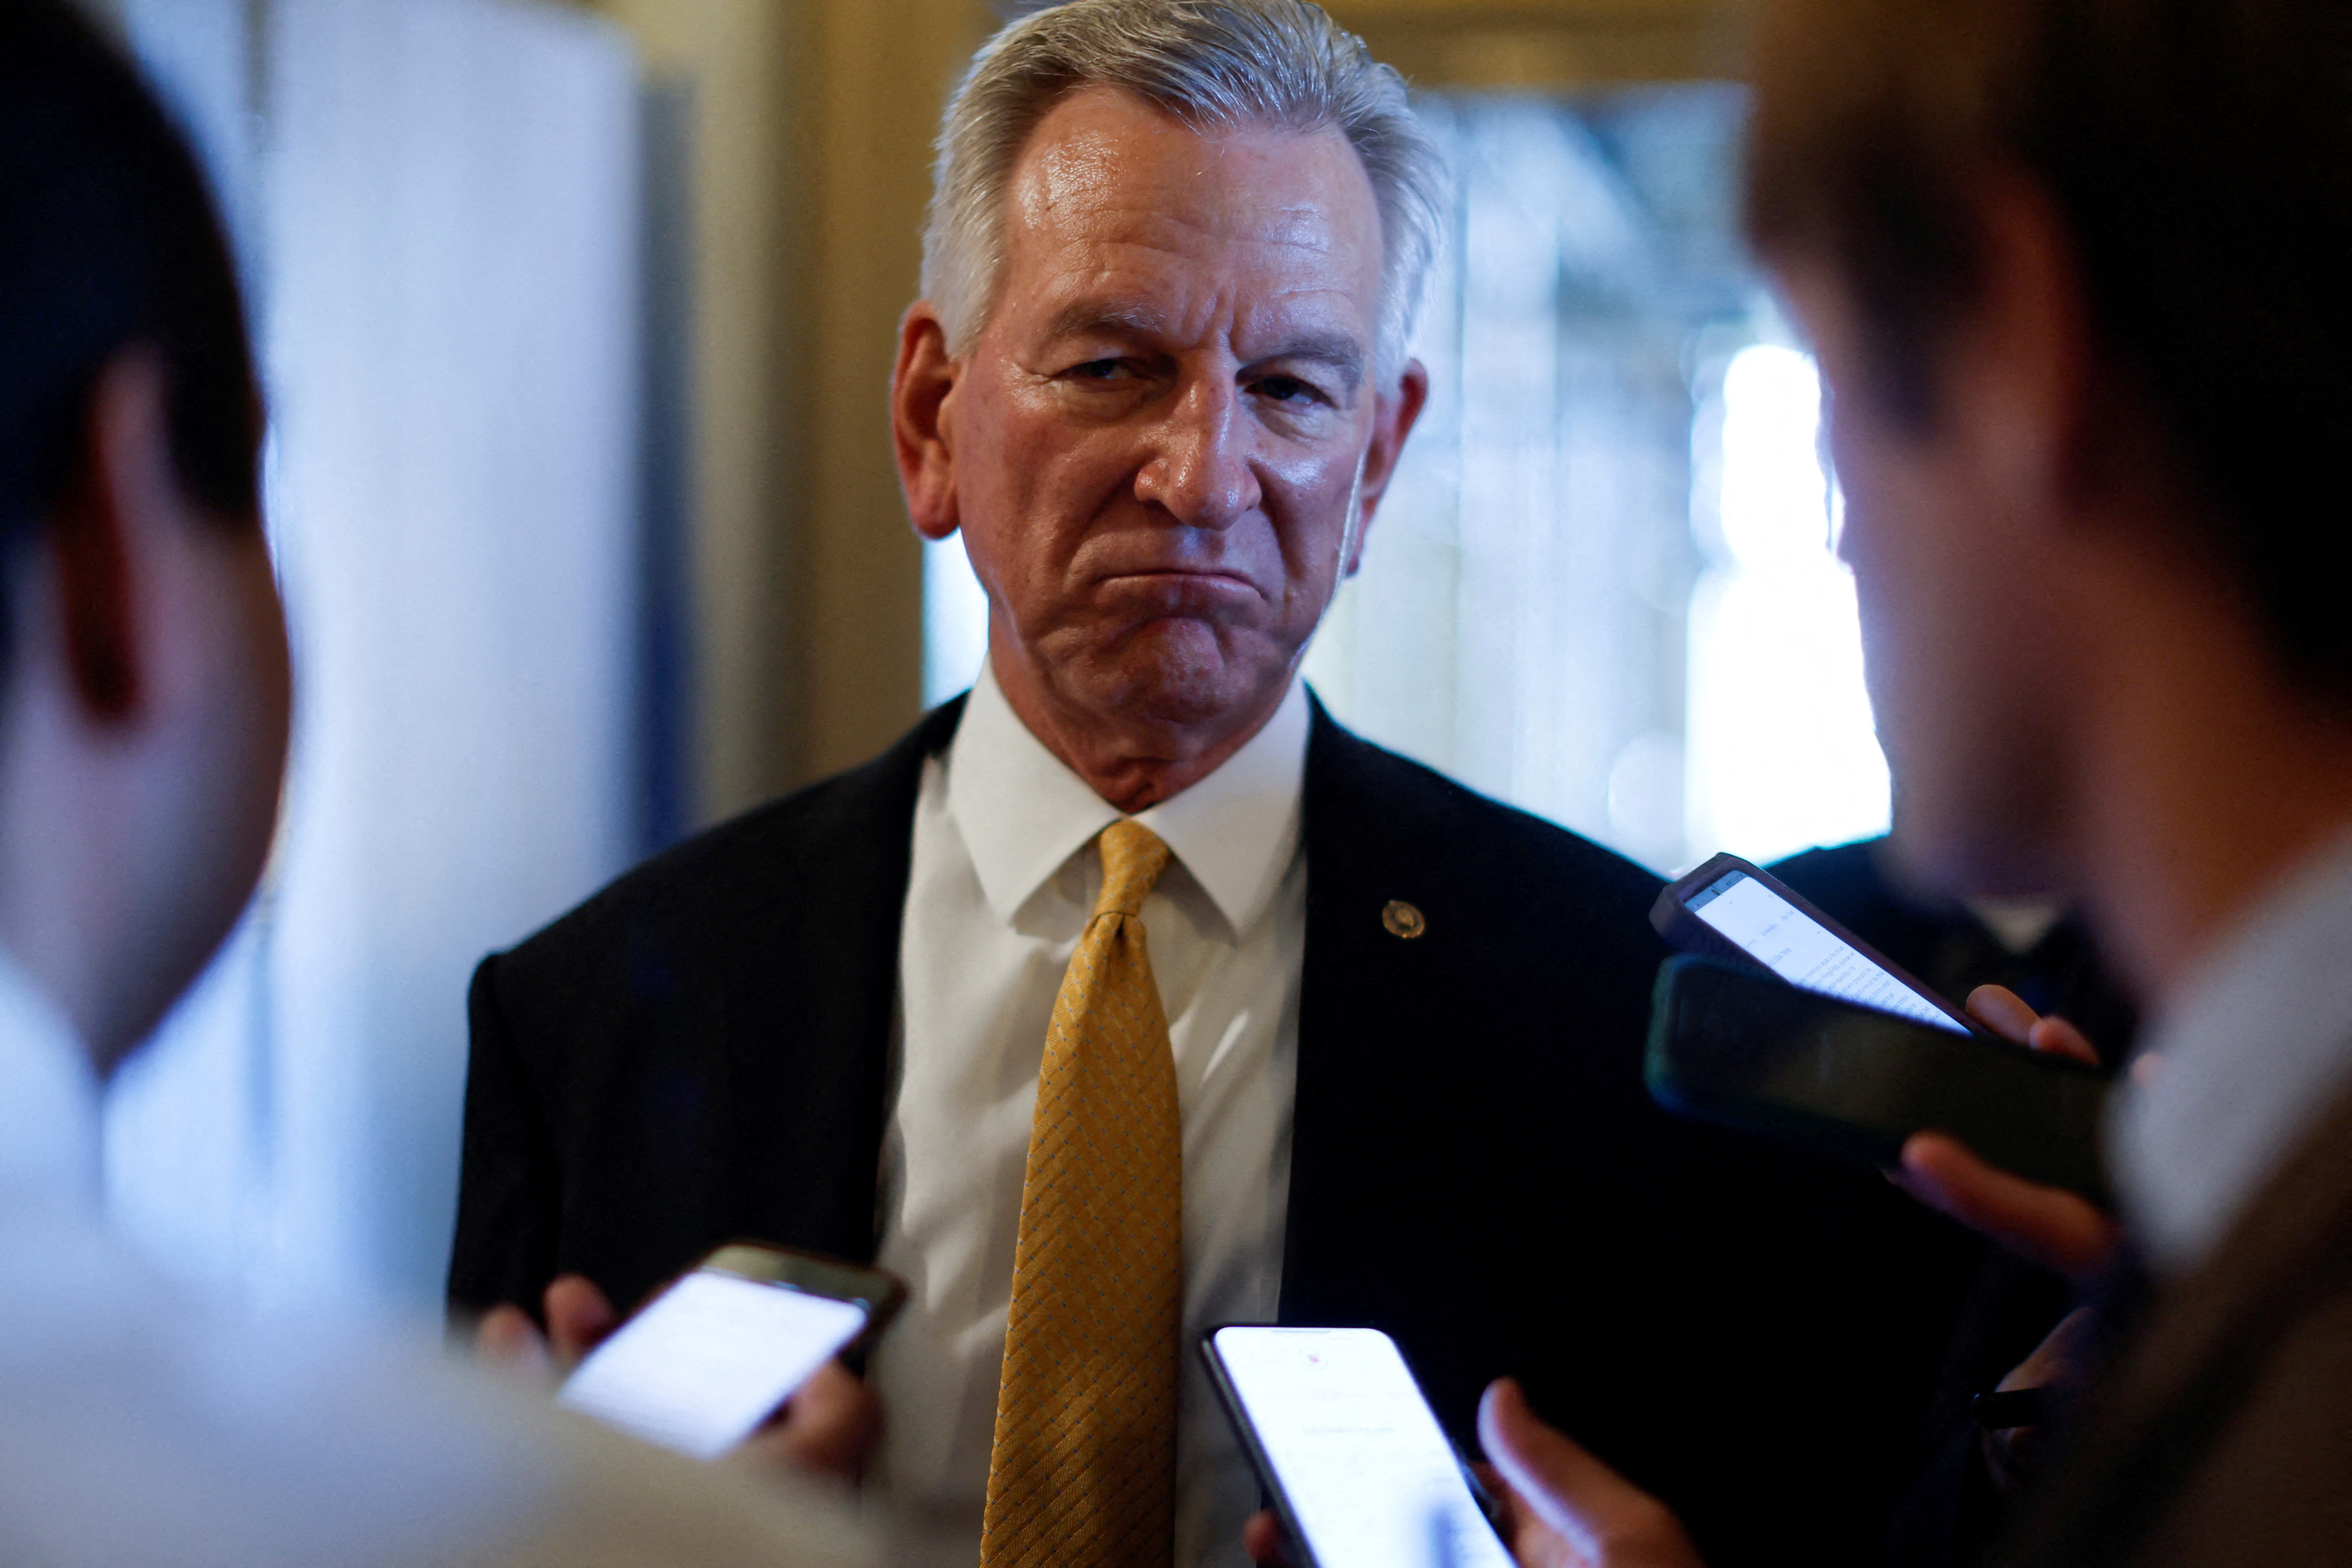 U.S. Senator Tuberville speaks with reporters at the U.S. Capitol in Washington